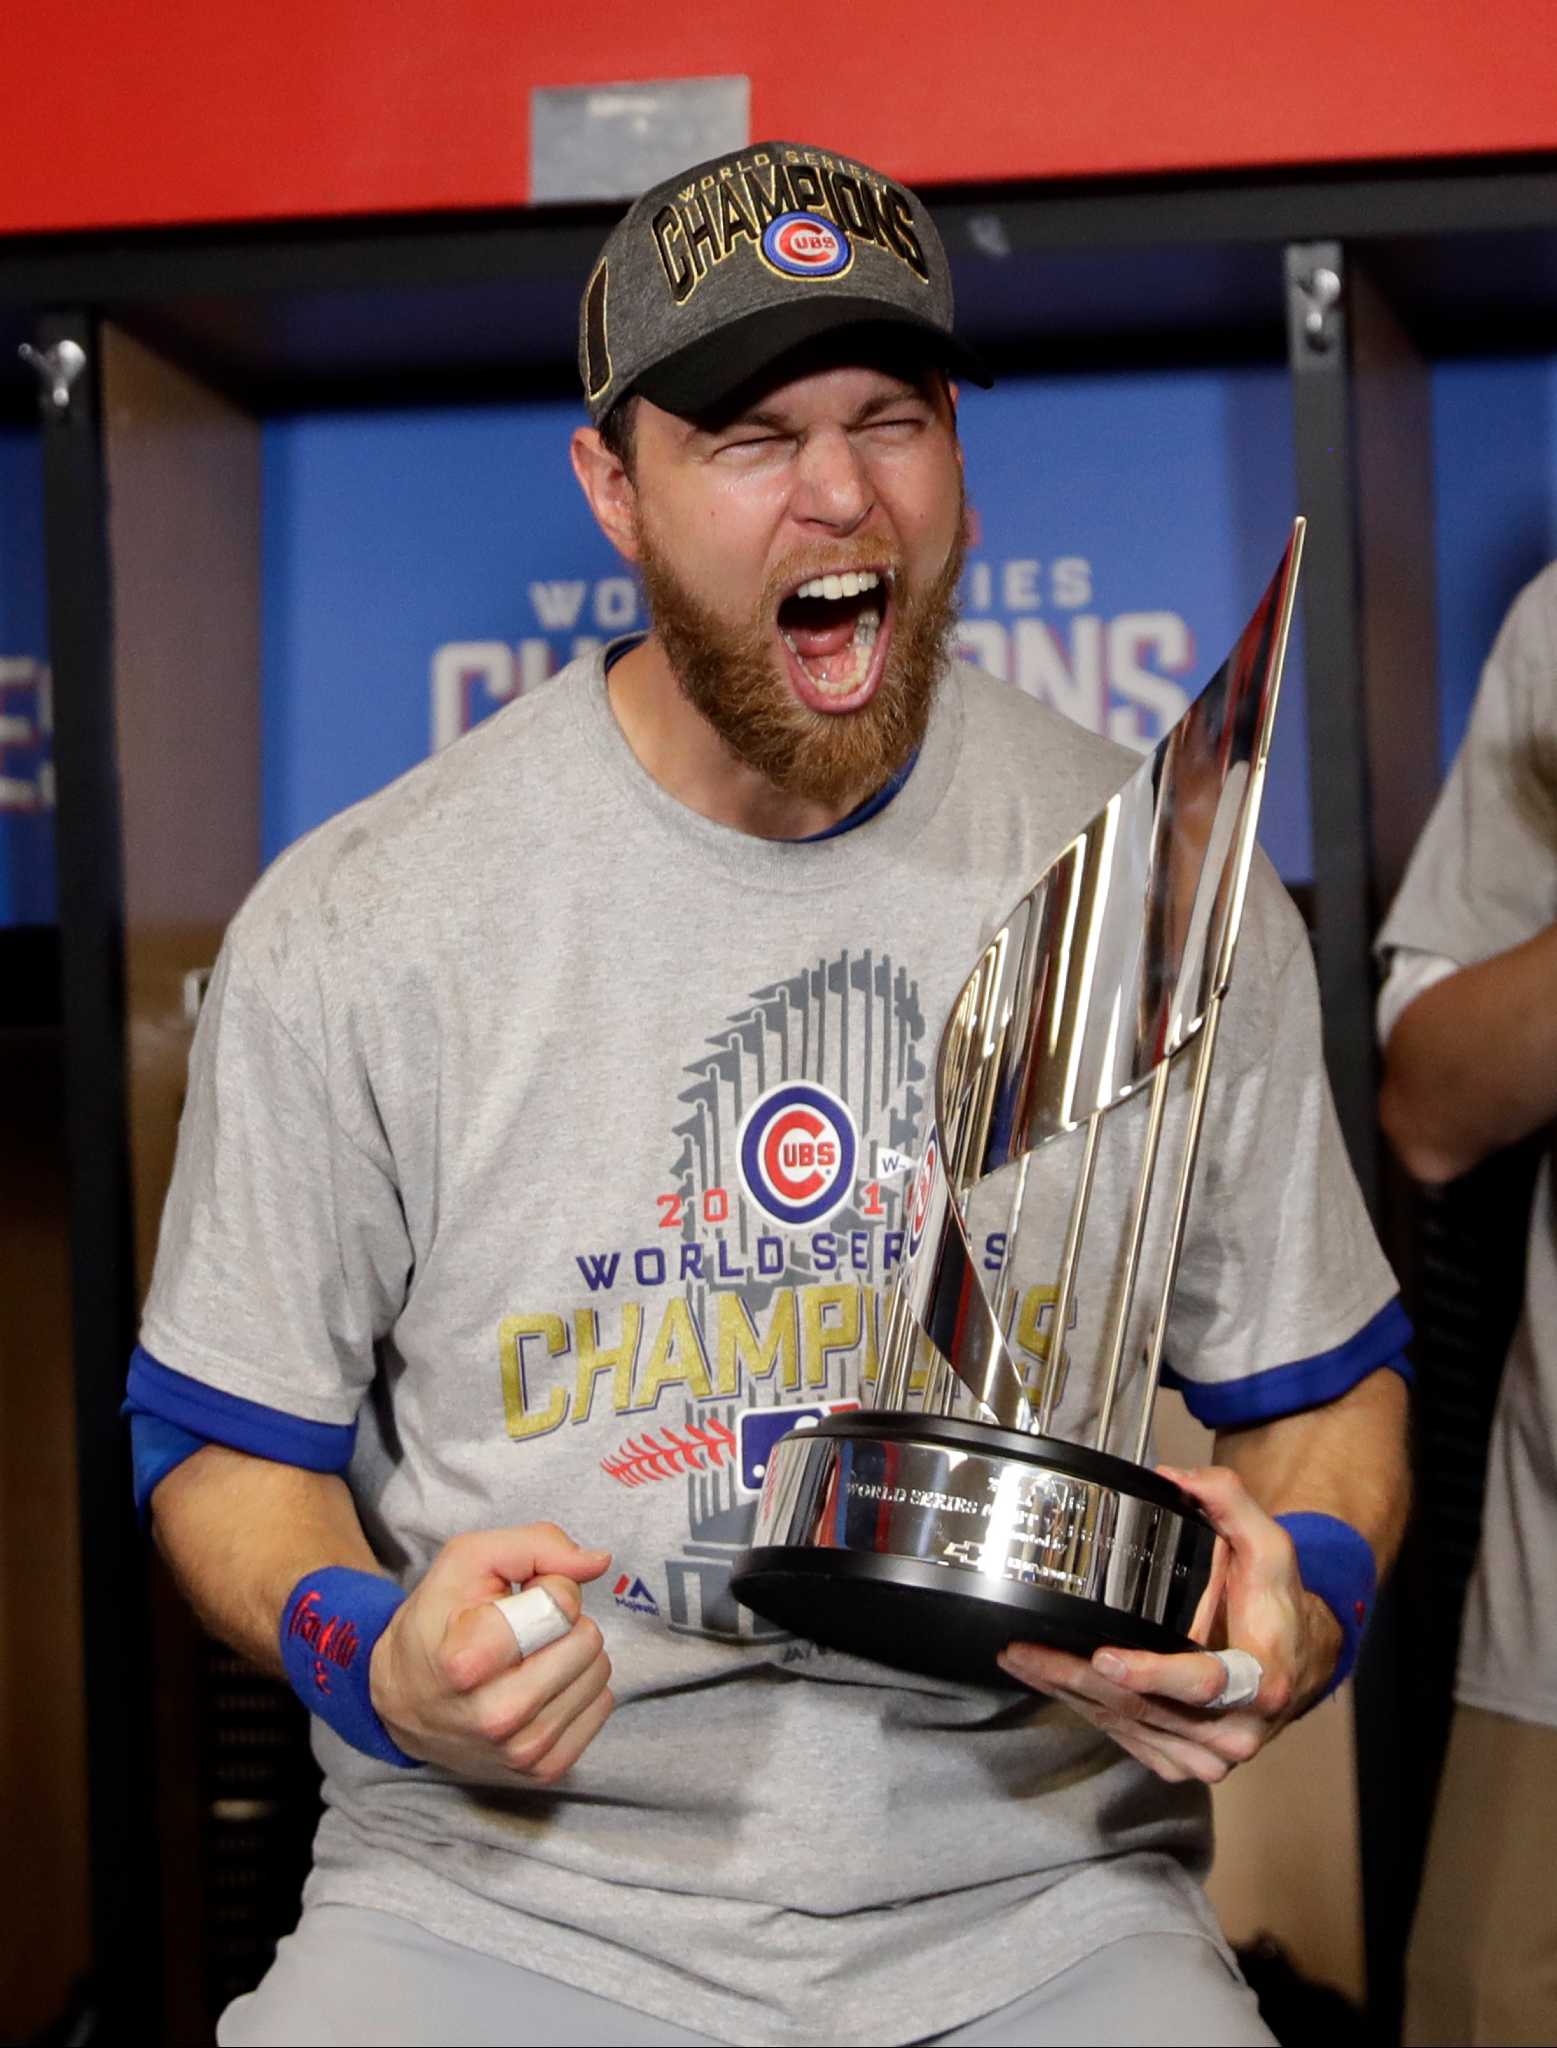 Nice guys do finish first: the Ben Zobrist story